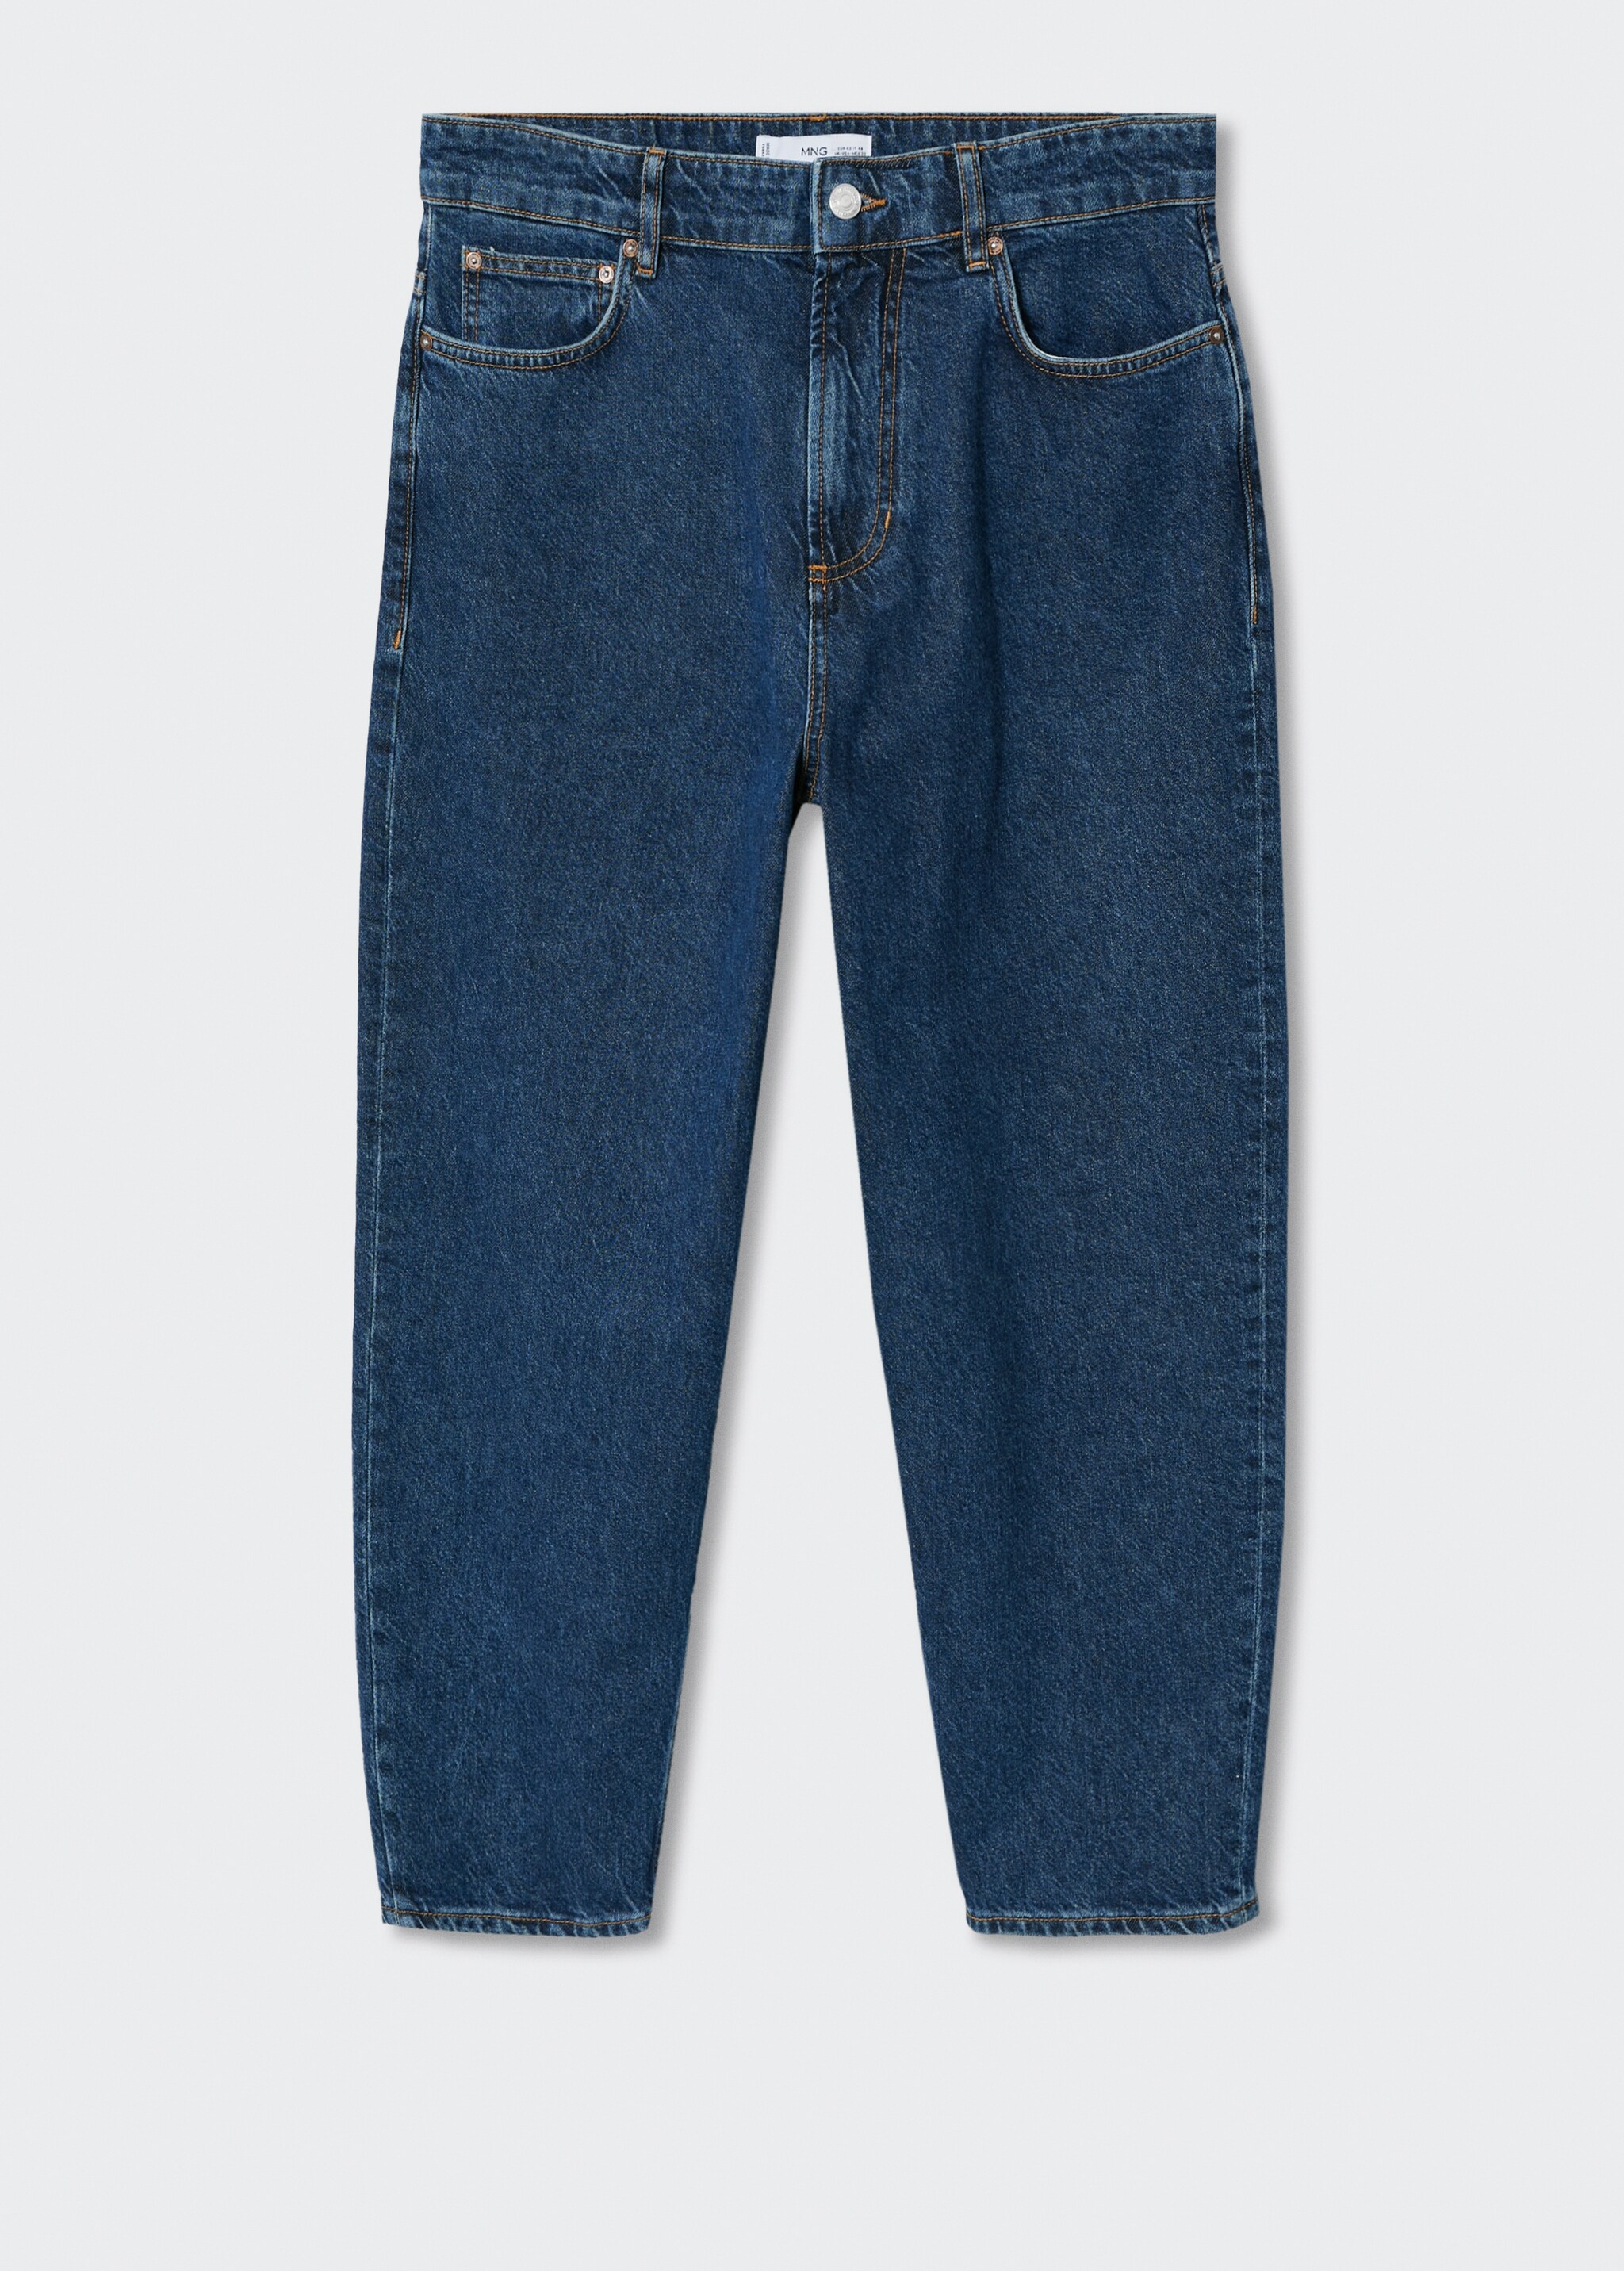 Tapered loose cropped jeans - Article without model